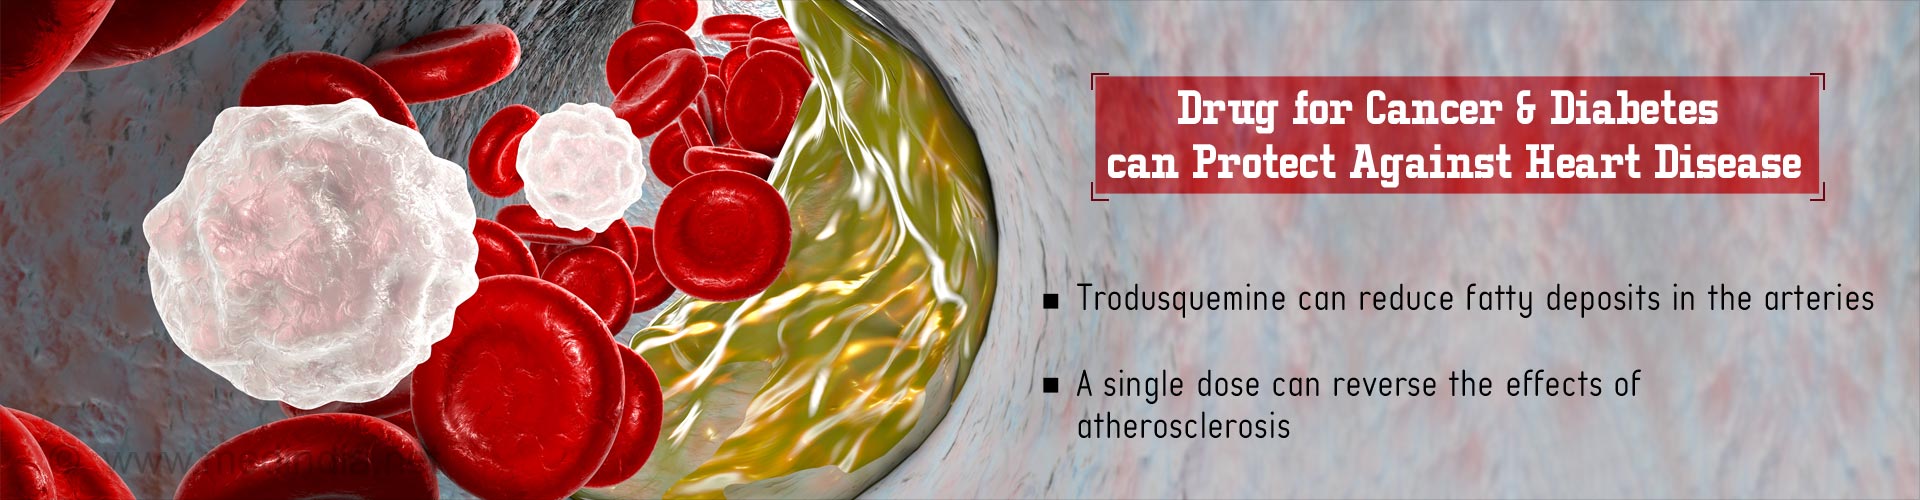 Drug for cancer & diabetes can protect against heart disease
- Trodusquemine can reduce fatty deposits in the arteries
- A single dose can reverse the effects of atherosclerosis